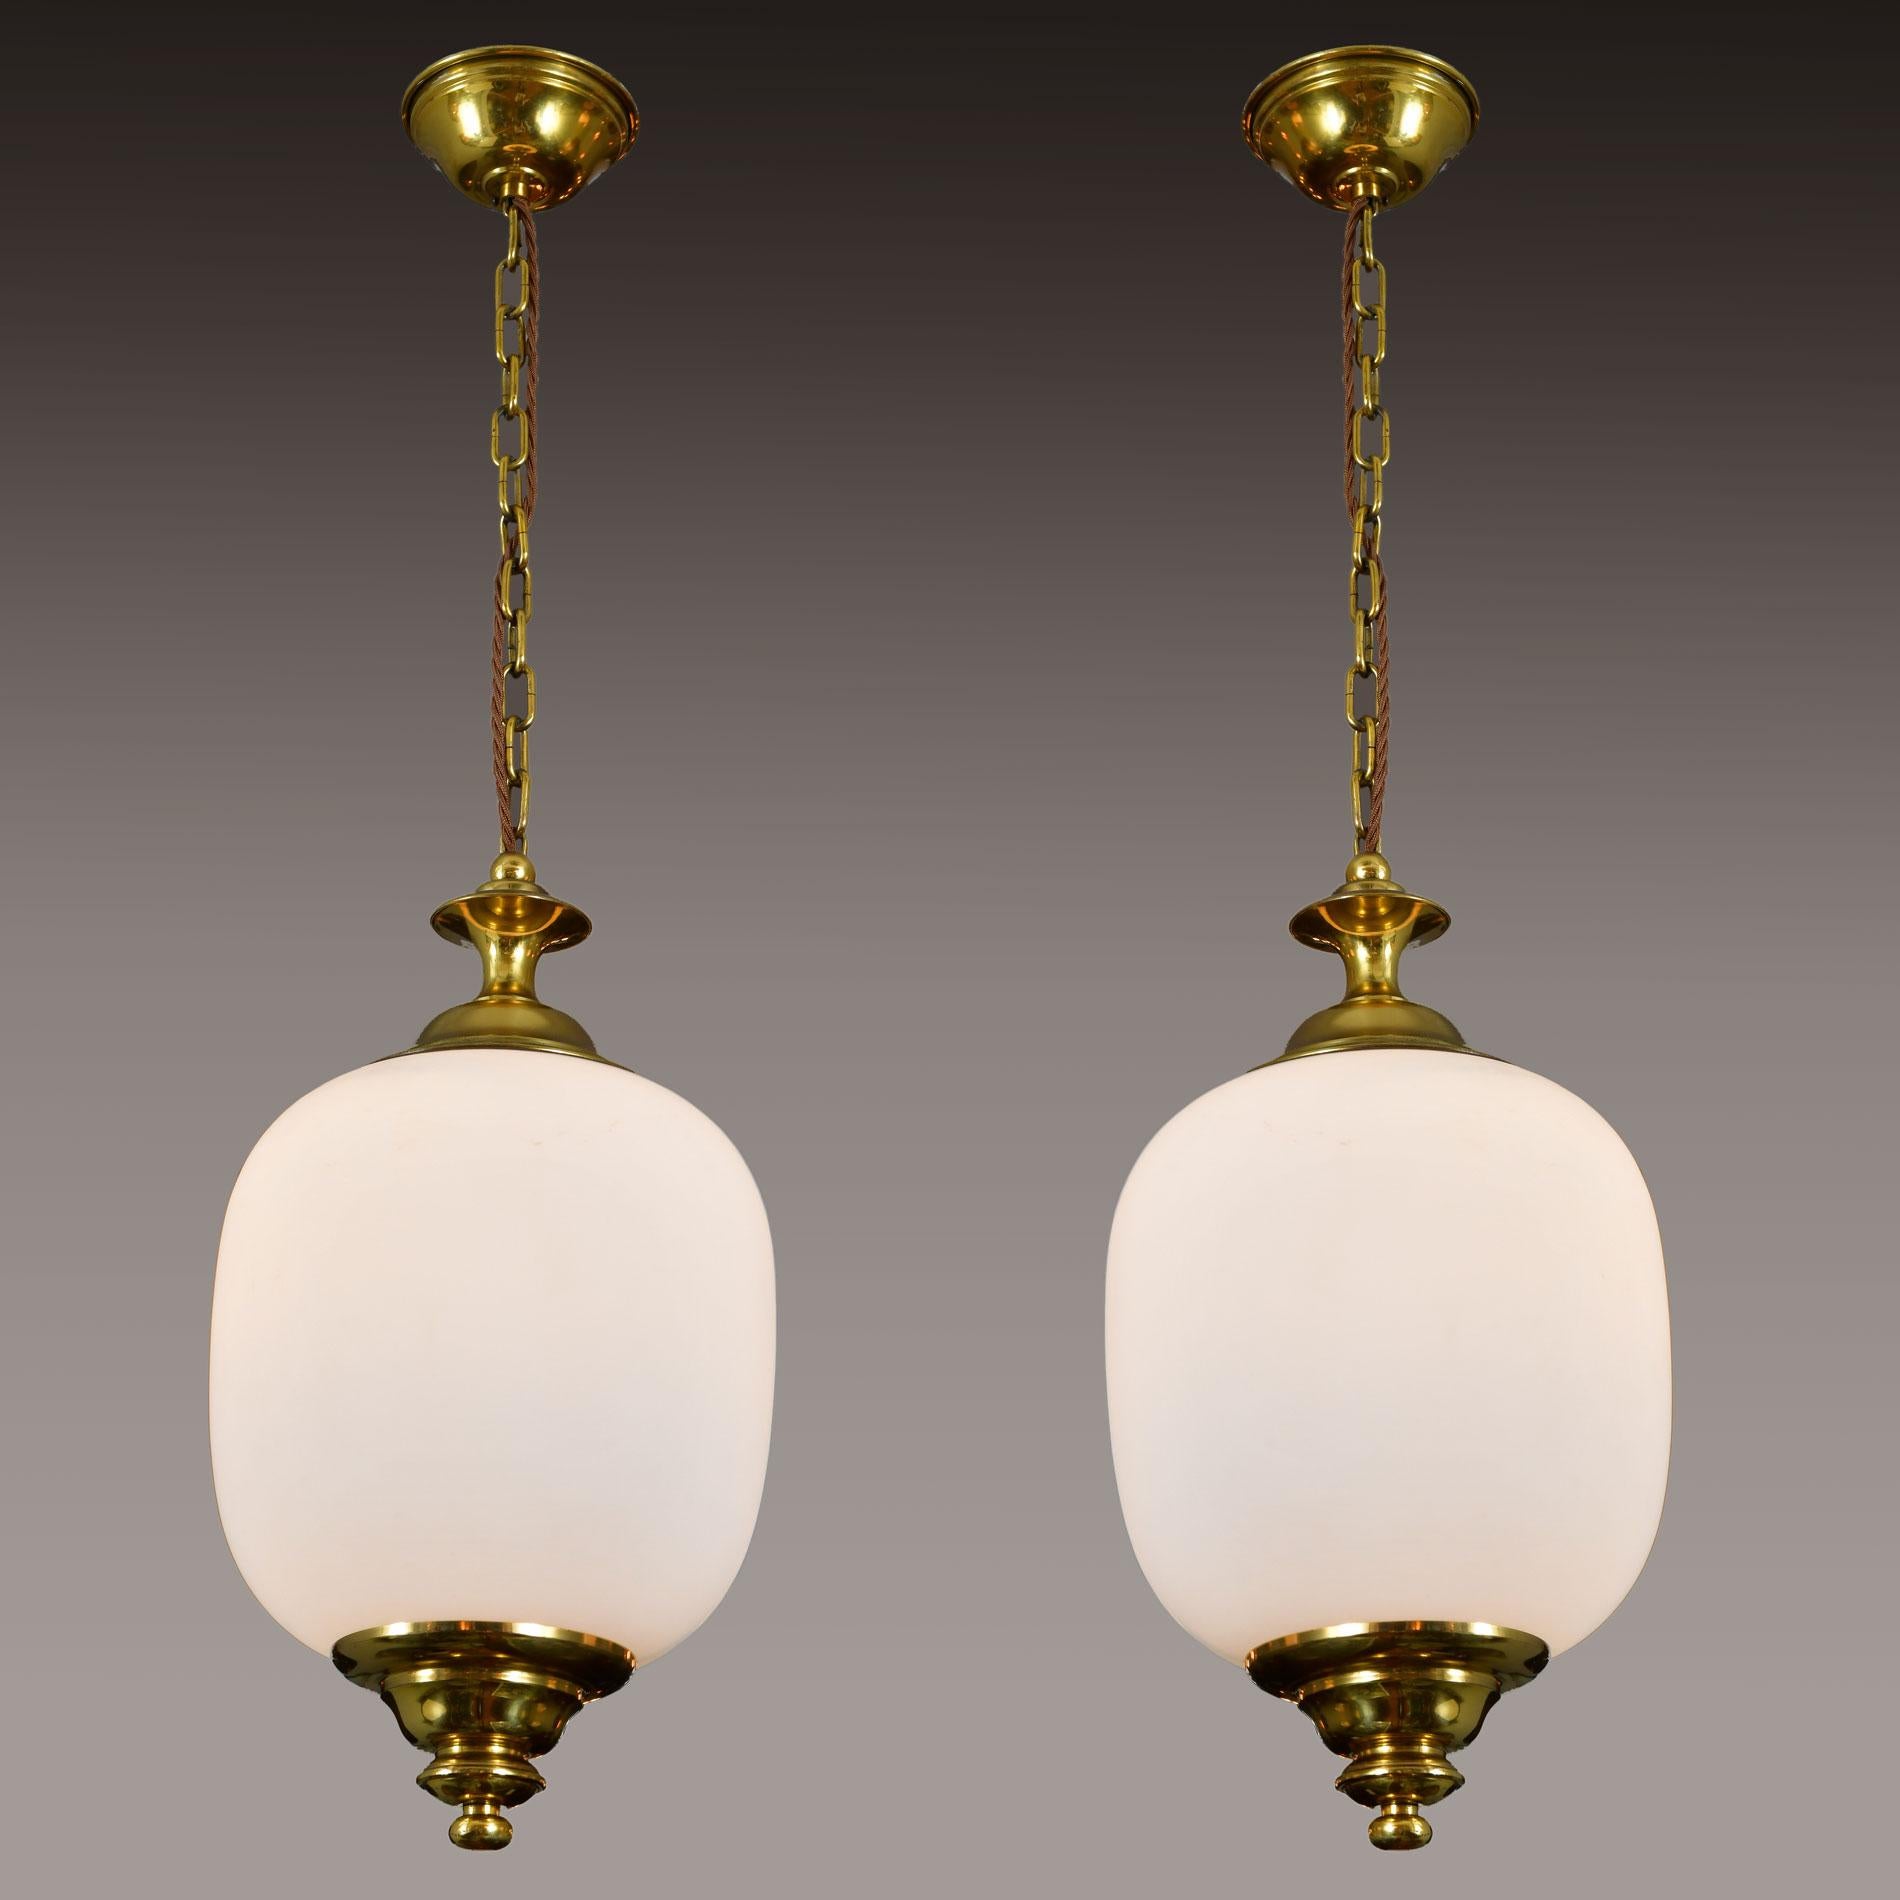 Midcentury Italian opaque white glass pendants with decorative tiered brass detail on either end of glass dome.